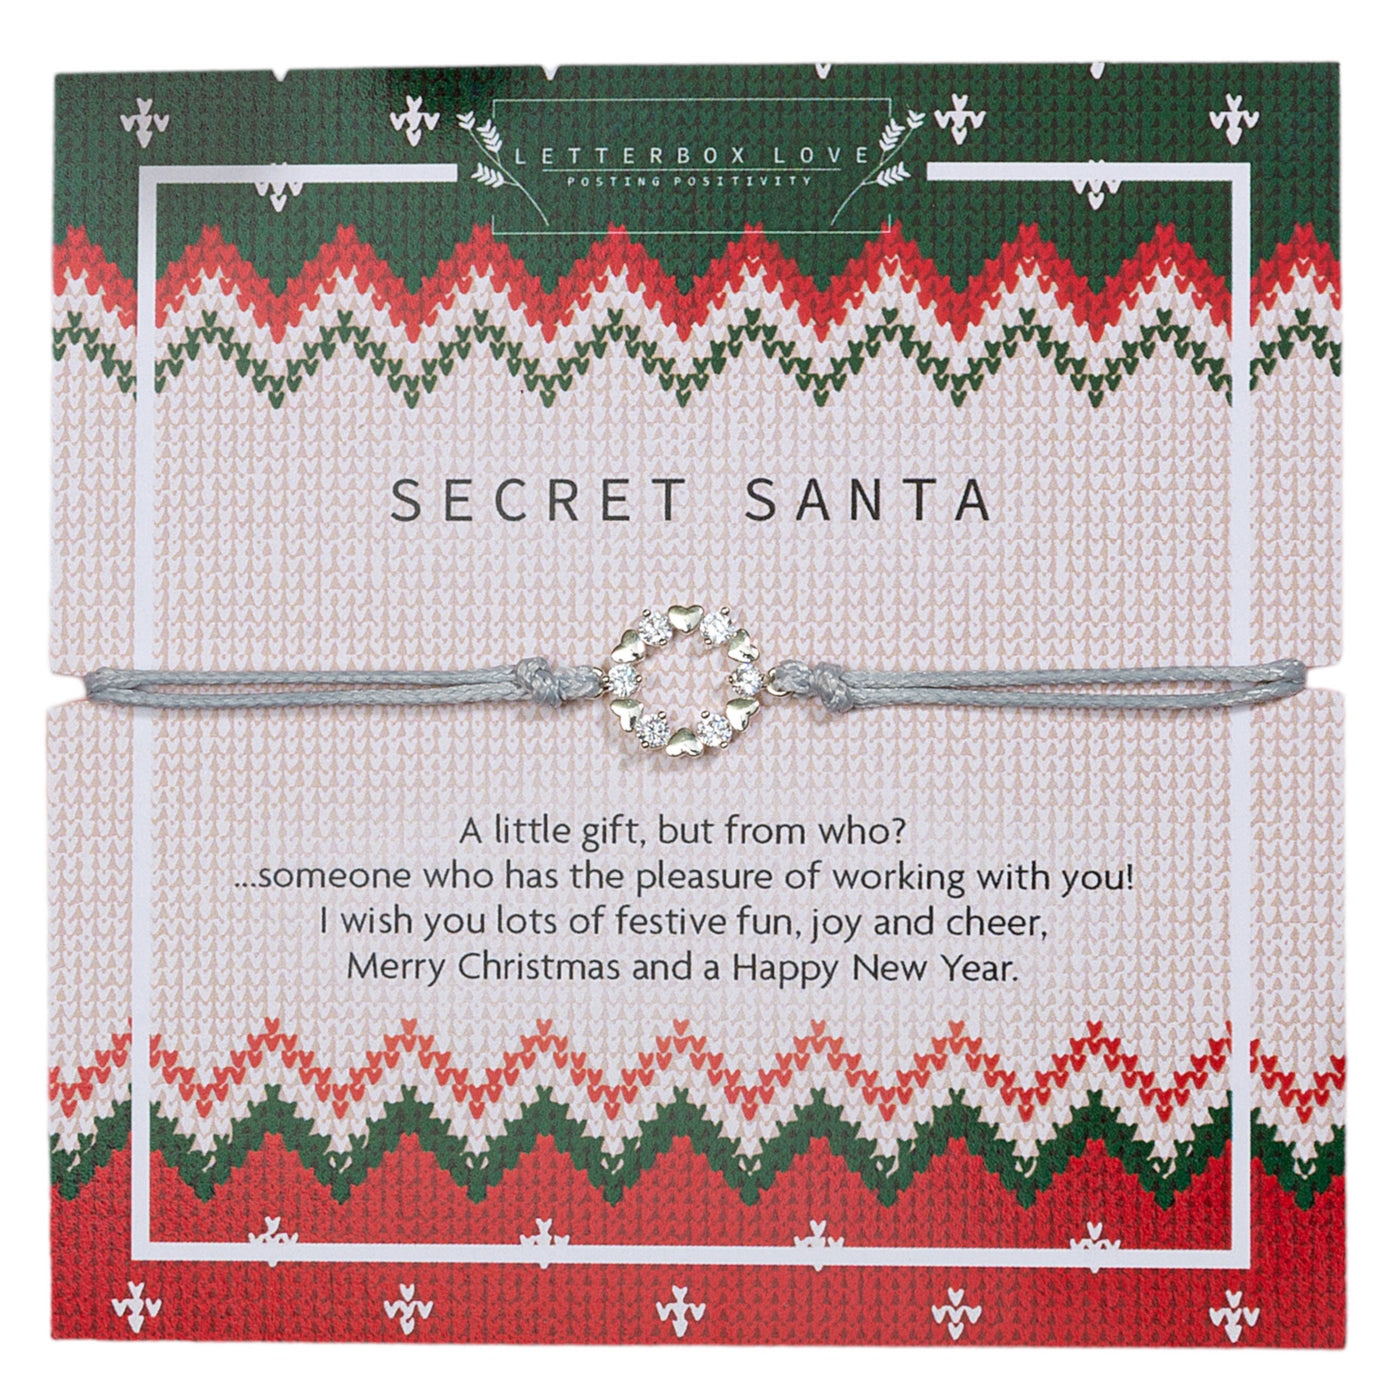 A festive Secret Santa greeting card from the 'Letterbox Love' collection featuring a knitted sweater pattern design in red, white, and green. The card is wrapped with a light grey string and a decorative silver wreath charm.